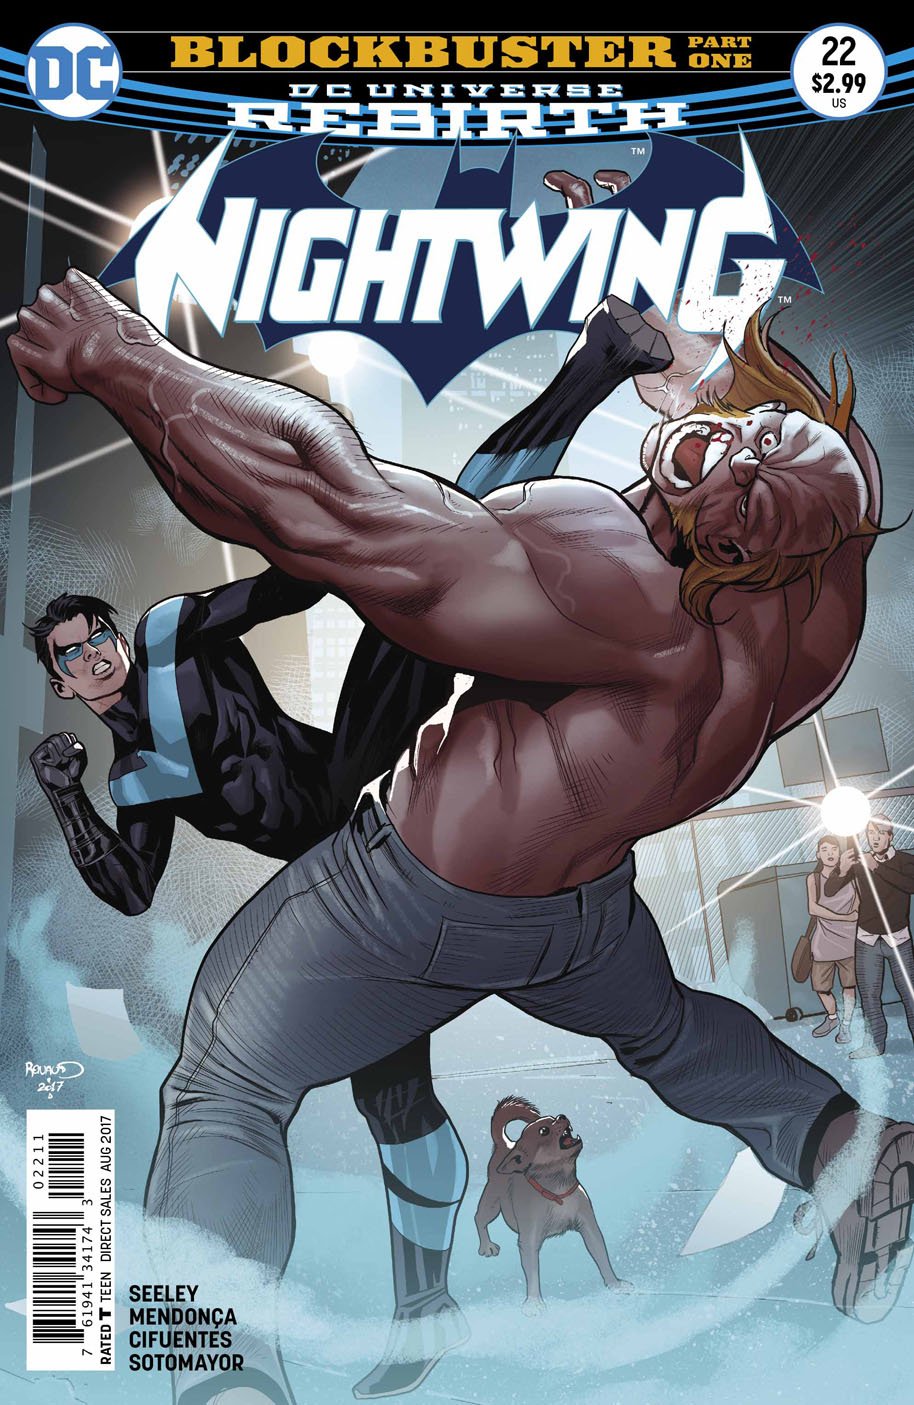 Nightwing #22 Review